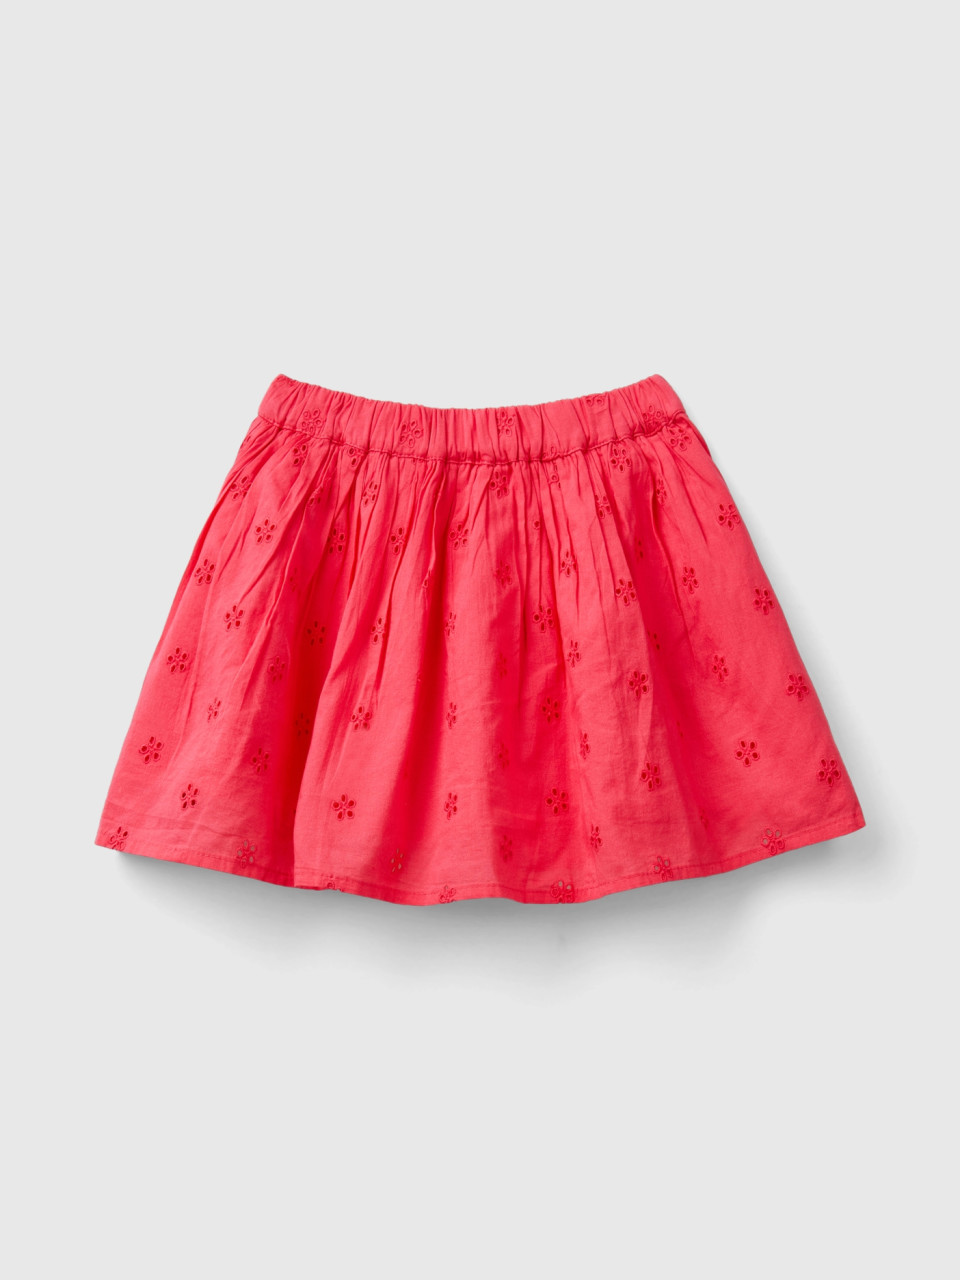 Benetton, Skirt With Broderie Anglaise Embroidery, Fuchsia, Kids